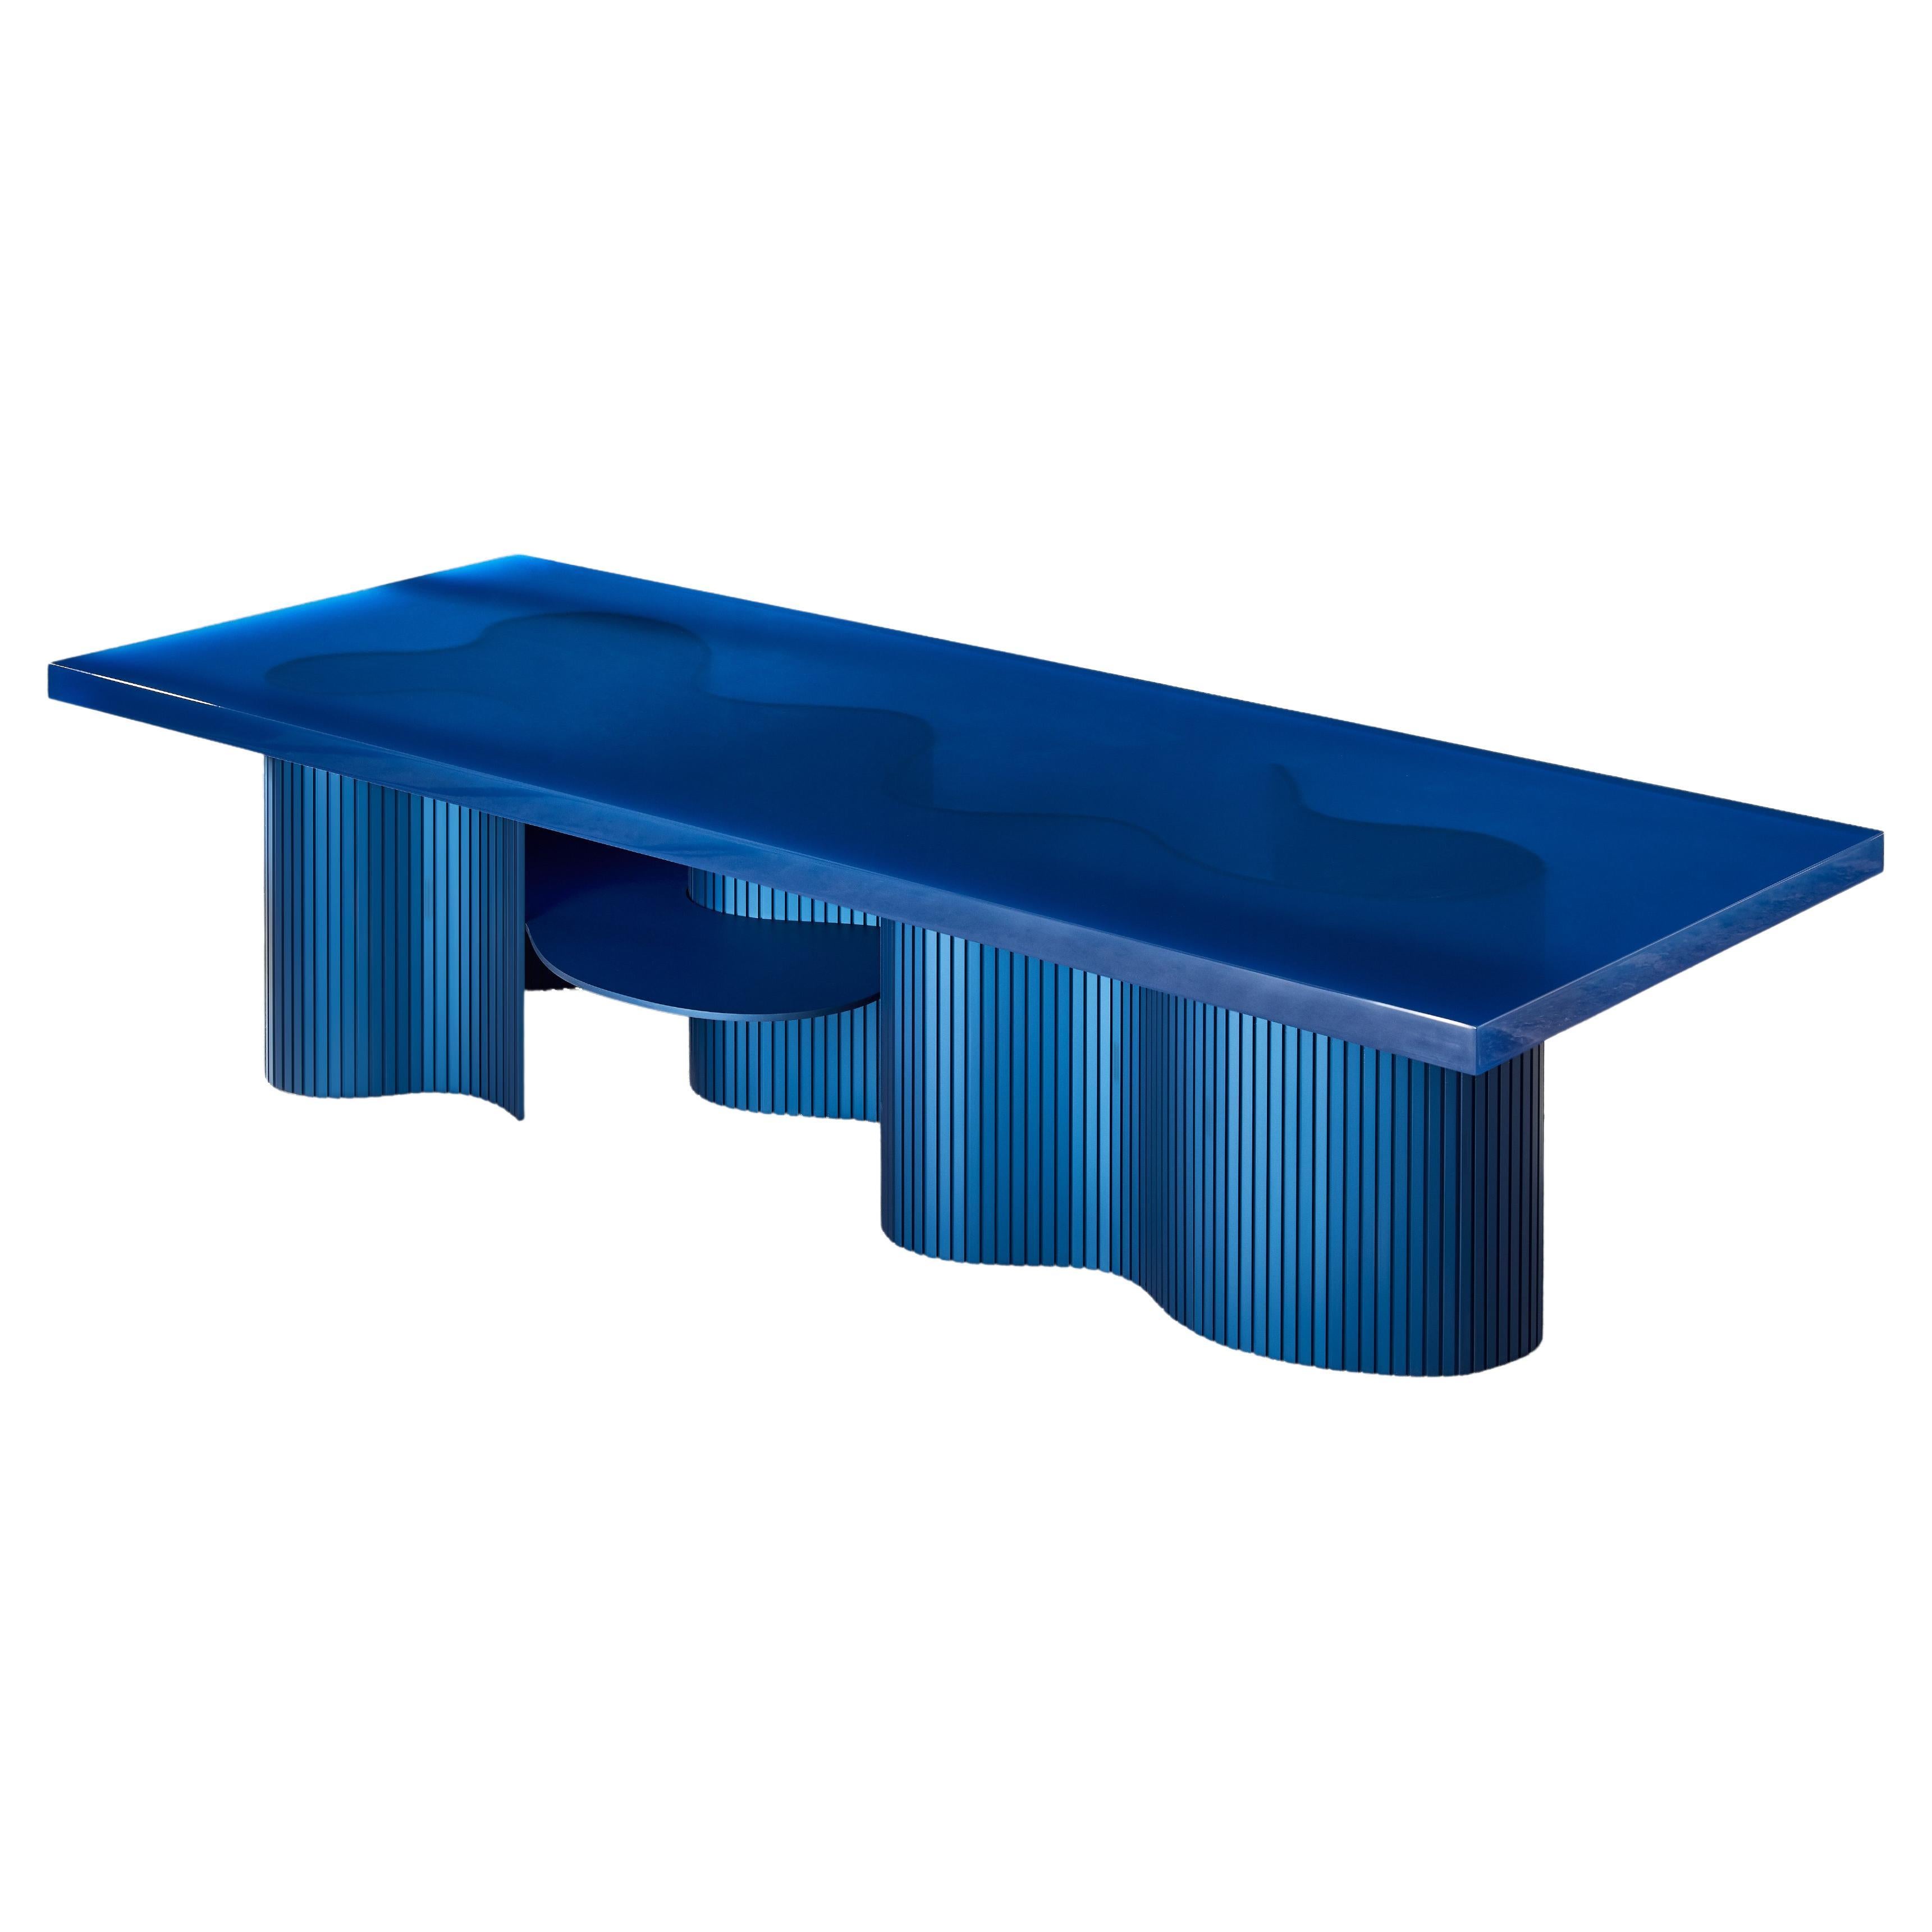 Contemporary Low Table with Shelves, Blue Polished Resin, by Erik Olovsson